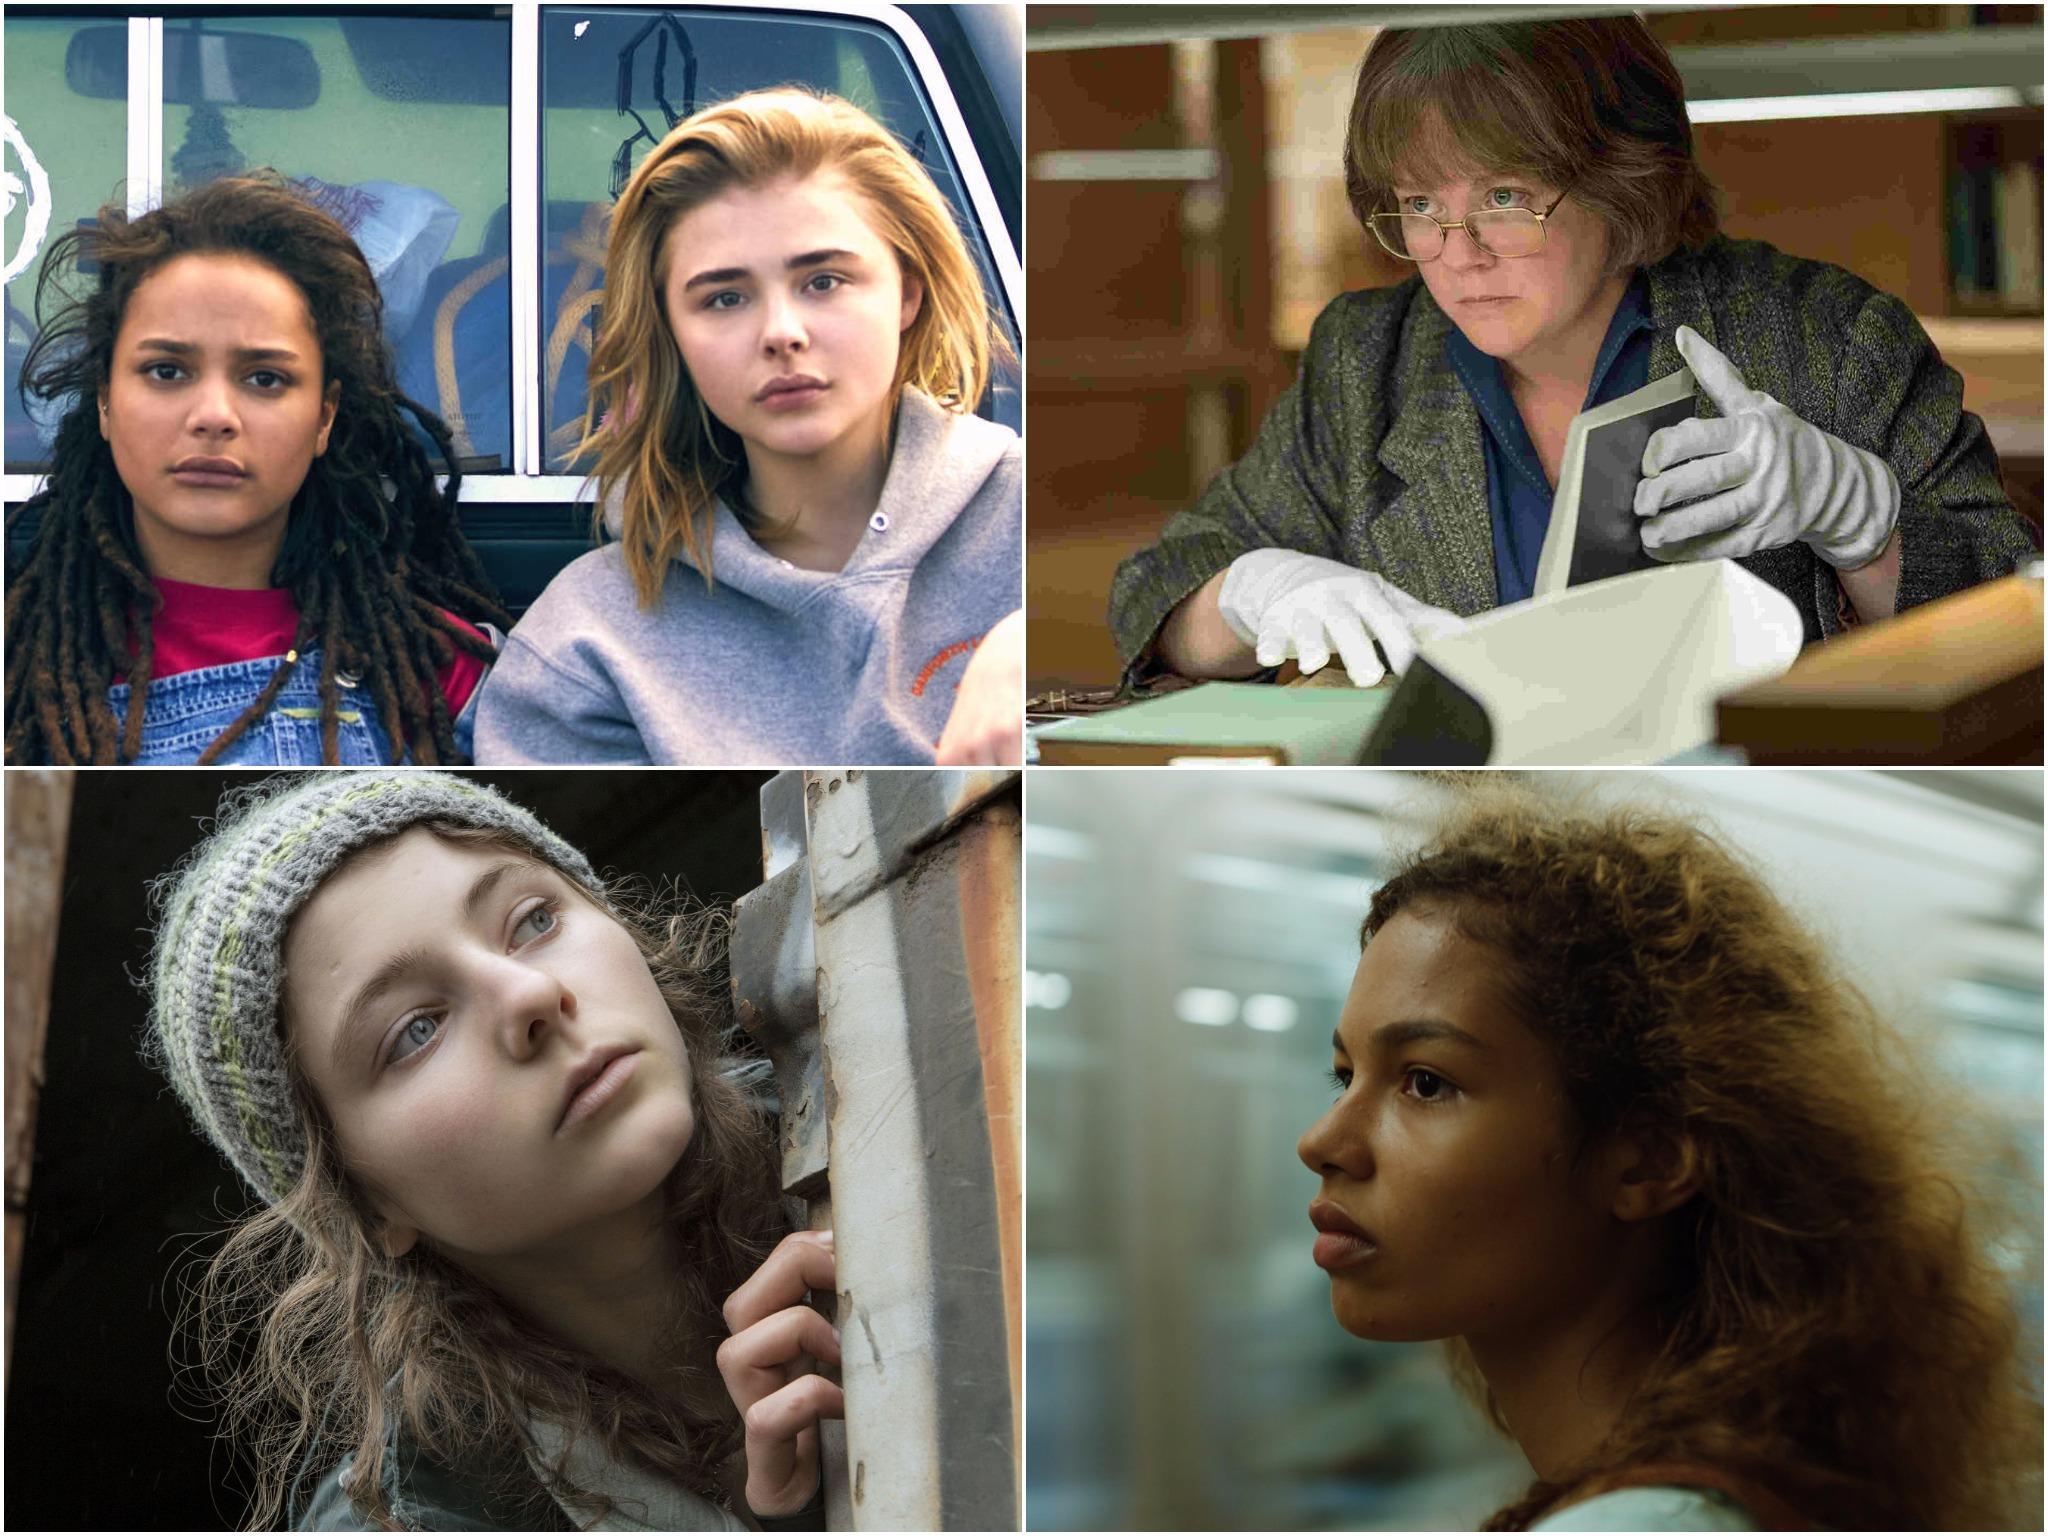 Clockwise from top right: The Miseducation of Cameron Post, Can You Ever Forgive Me?, Madeline’s Madeline and Leave No Trace